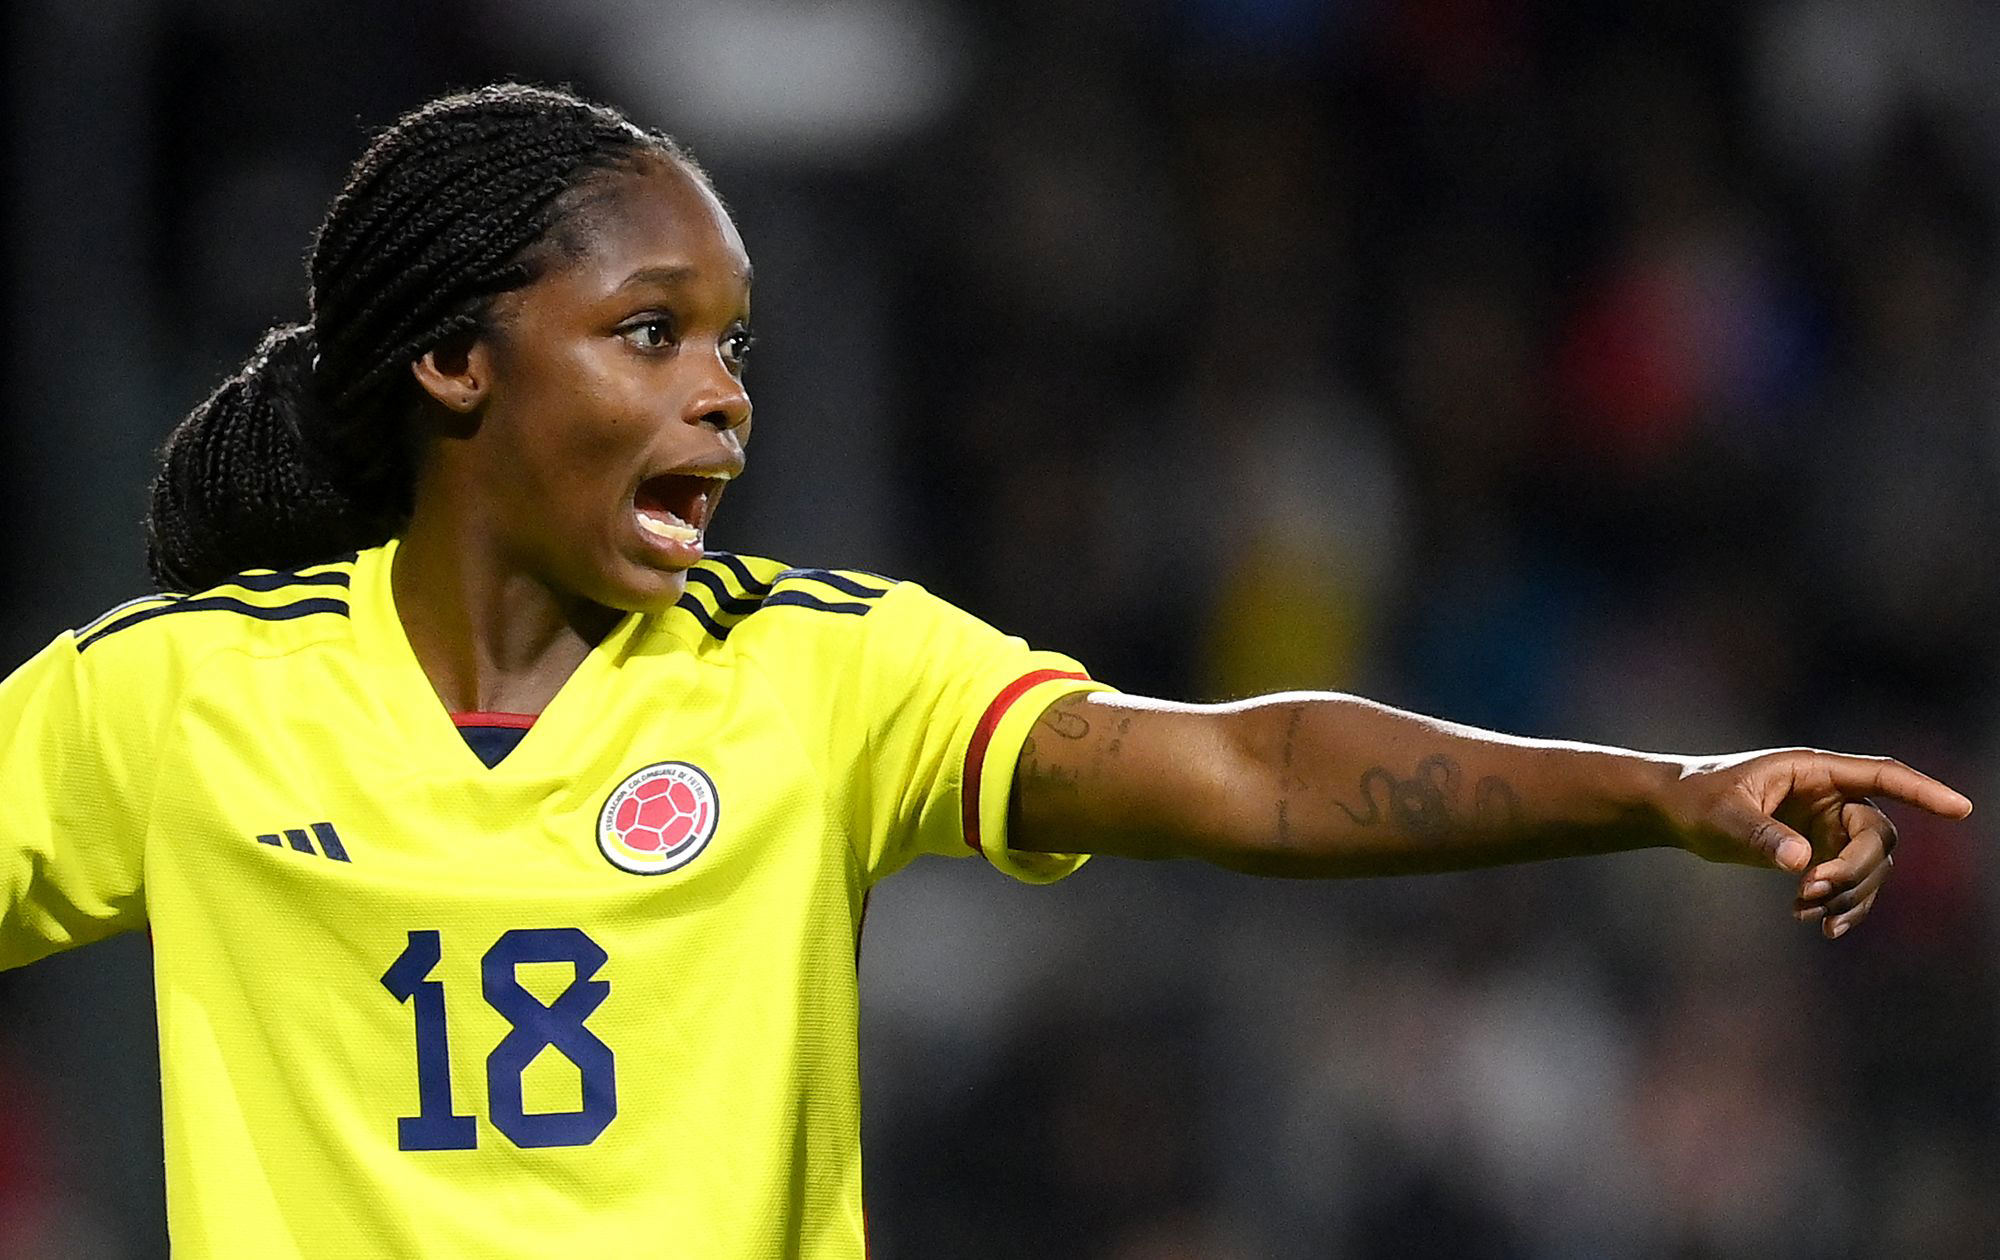 Colombia women’s soccer team roster: players, profiles, stars